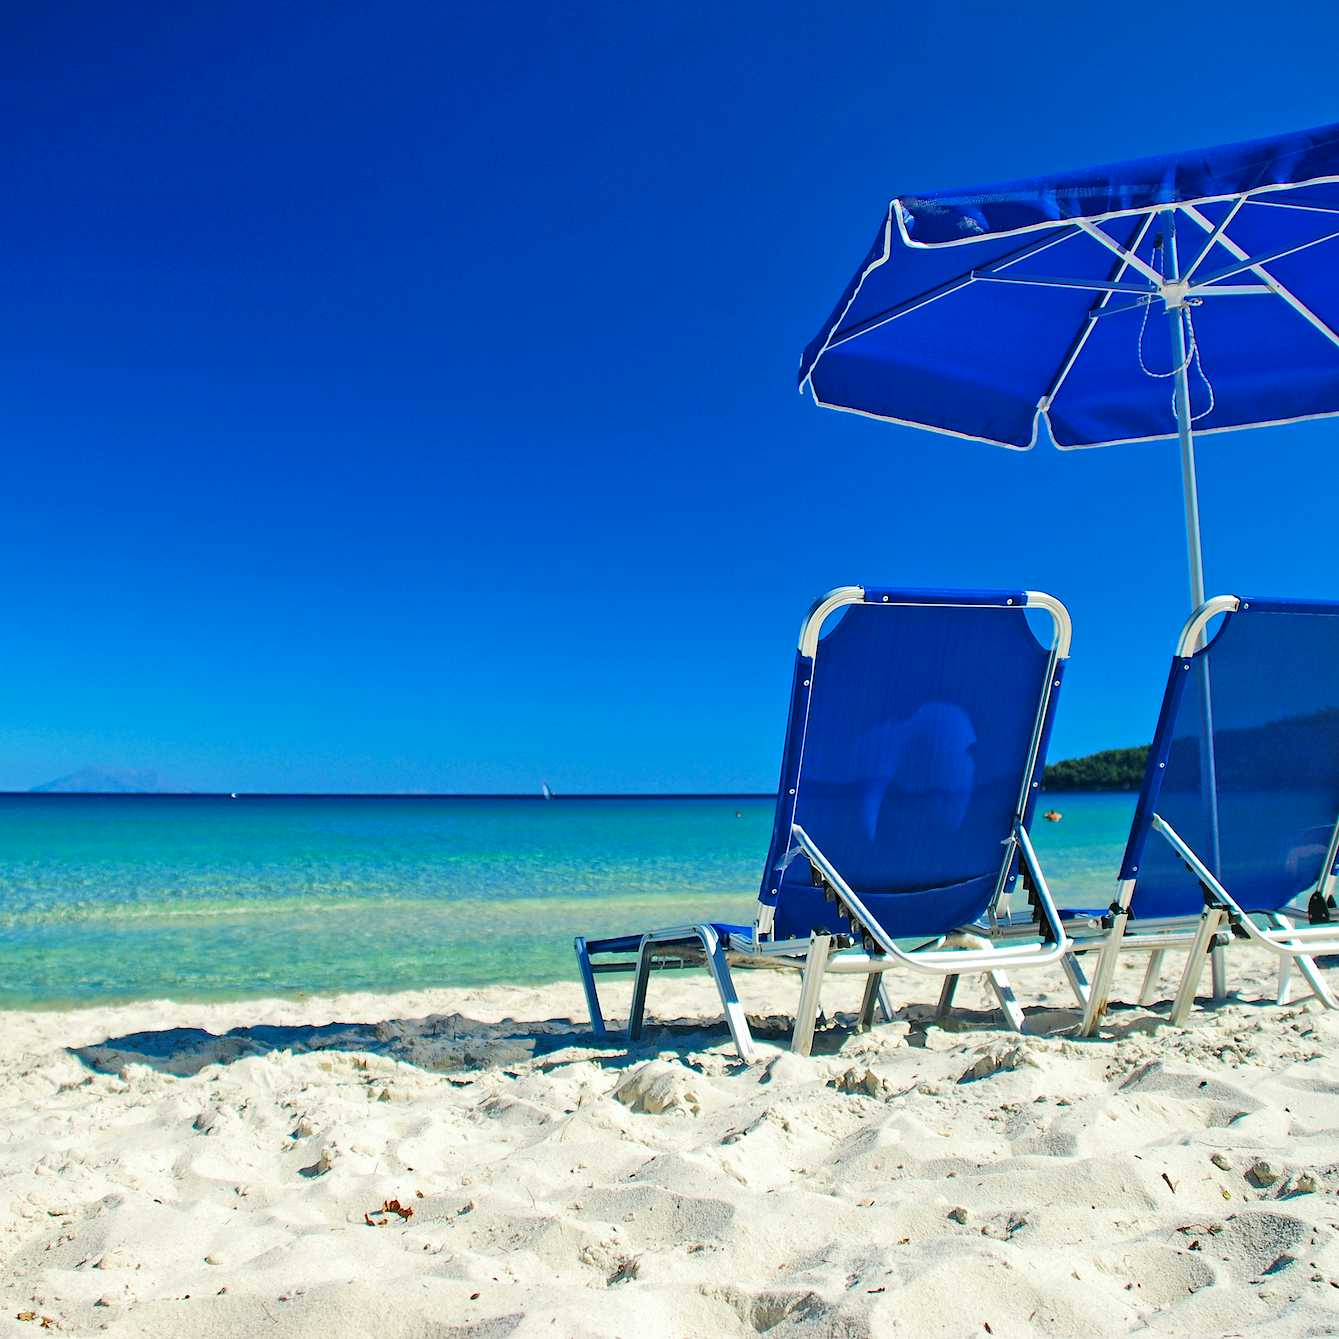 Photo Caption: Enjoy your day relaxing in the sun at Golden Beach